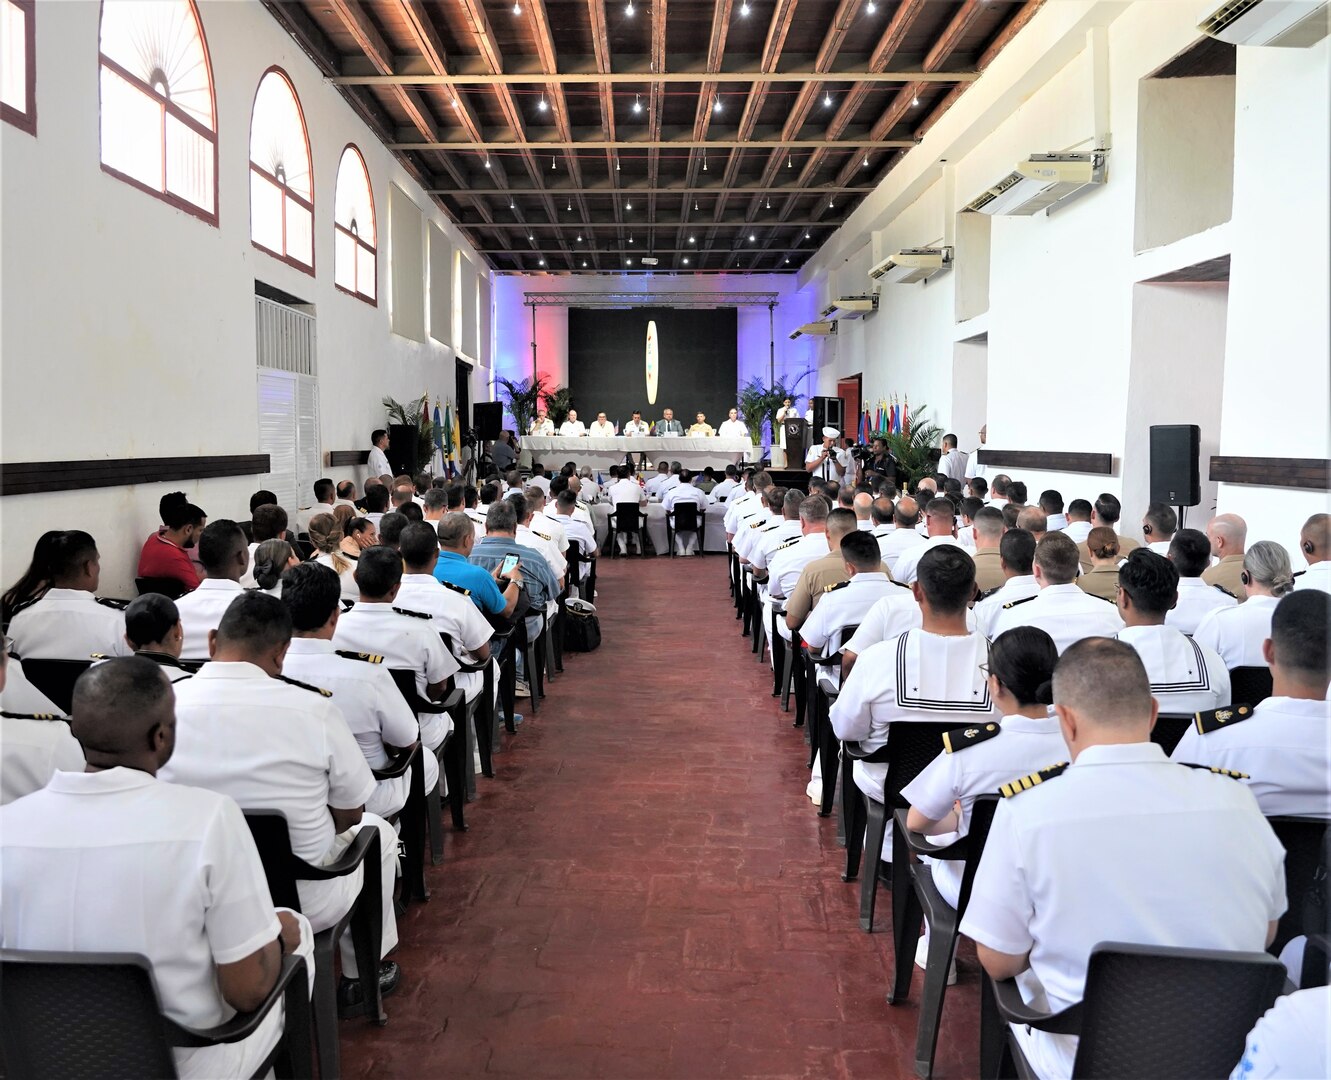 Sailors and Marines from 20 partner nations attend the official opening ceremony of UNITAS LXIV, at the Colombian Naval Museum, Cartagena, Colombia, July 12, 2023. UNITAS, which is Latin for “unity,” was conceived in 1959 and has taken place annually since first conducted in 1960. This year marks the 64th iteration of the world’s longest-running annual multinational maritime exercise. Additionally, this year the Colombian Navy will celebrate its bicentennial. The exercise focuses on enhancing interoperability amongst the partnered nations and joint forces during littoral and amphibious operations in order to build on existing regional partnerships and create new enduring relationships that promote peace, stability and prosperity in the U.S. Southern Command’s area of responsibility. (U.S. Marine Corps photo by Maj. Jeremy Wheeler)